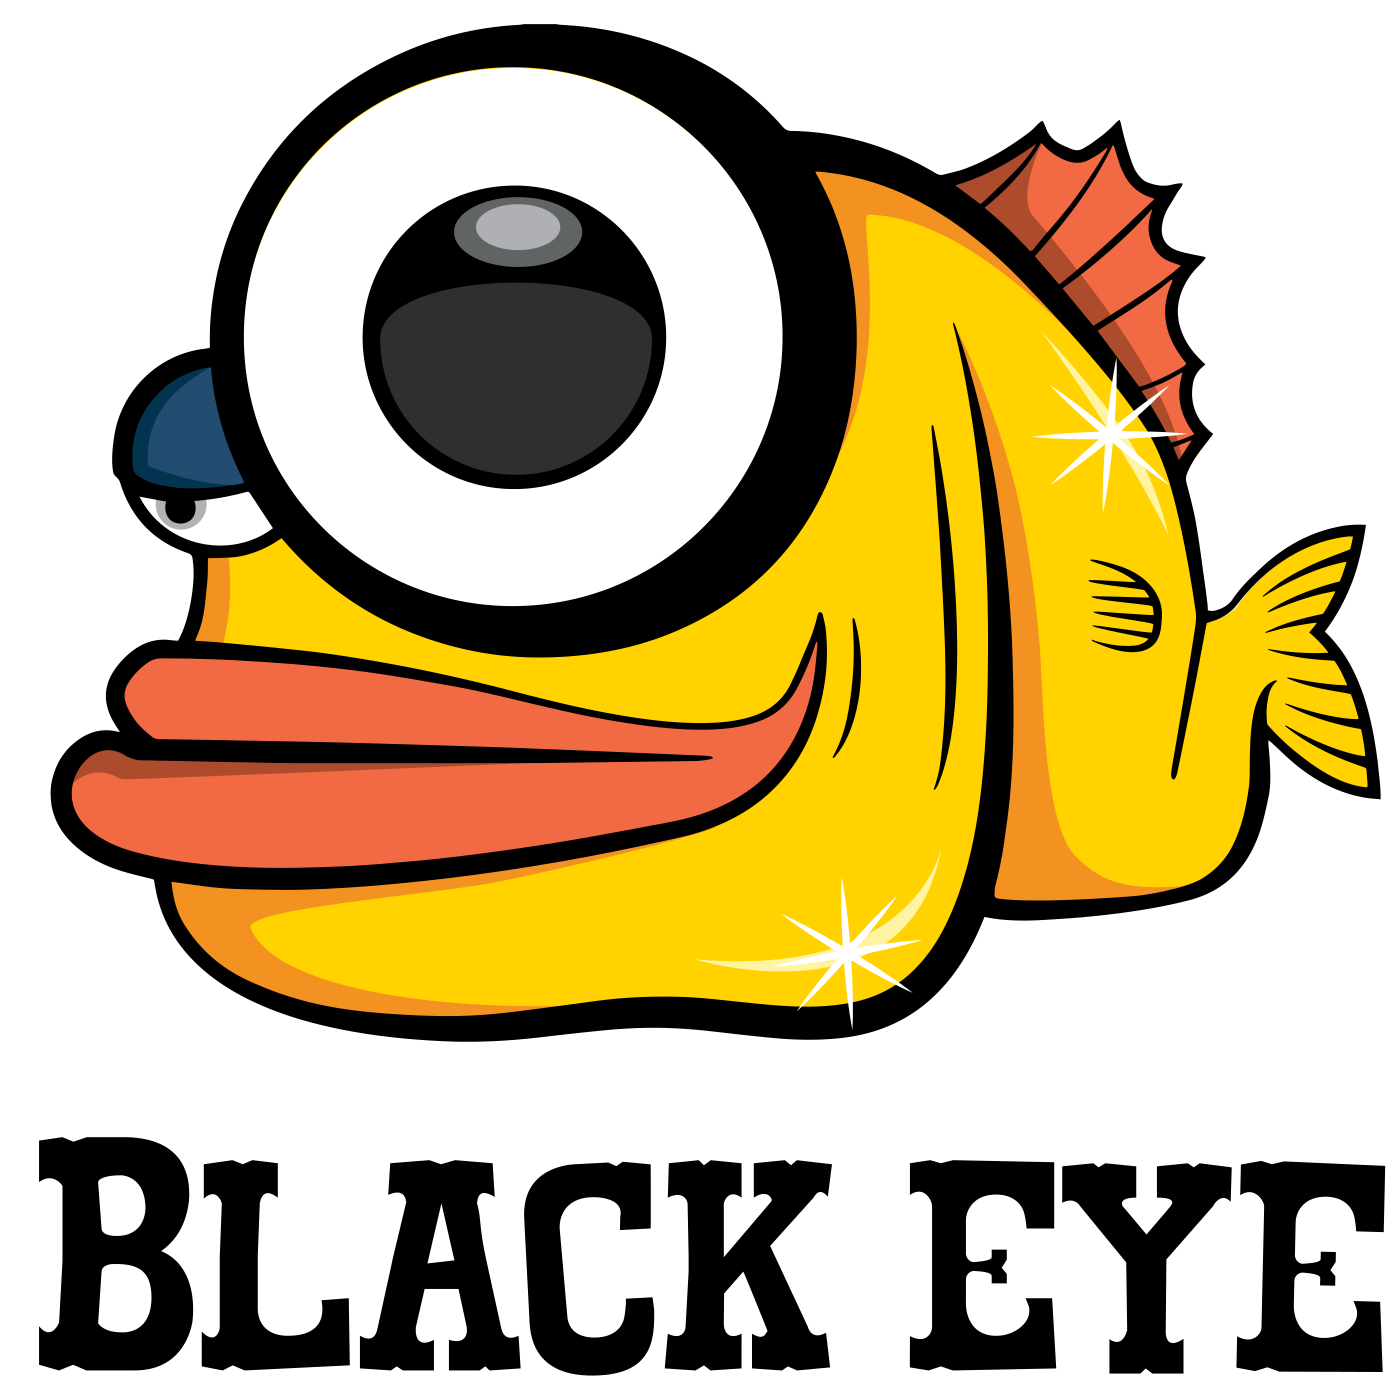 Black Eye Logo - Black Eye G4 smartphone lens for IOS and Android